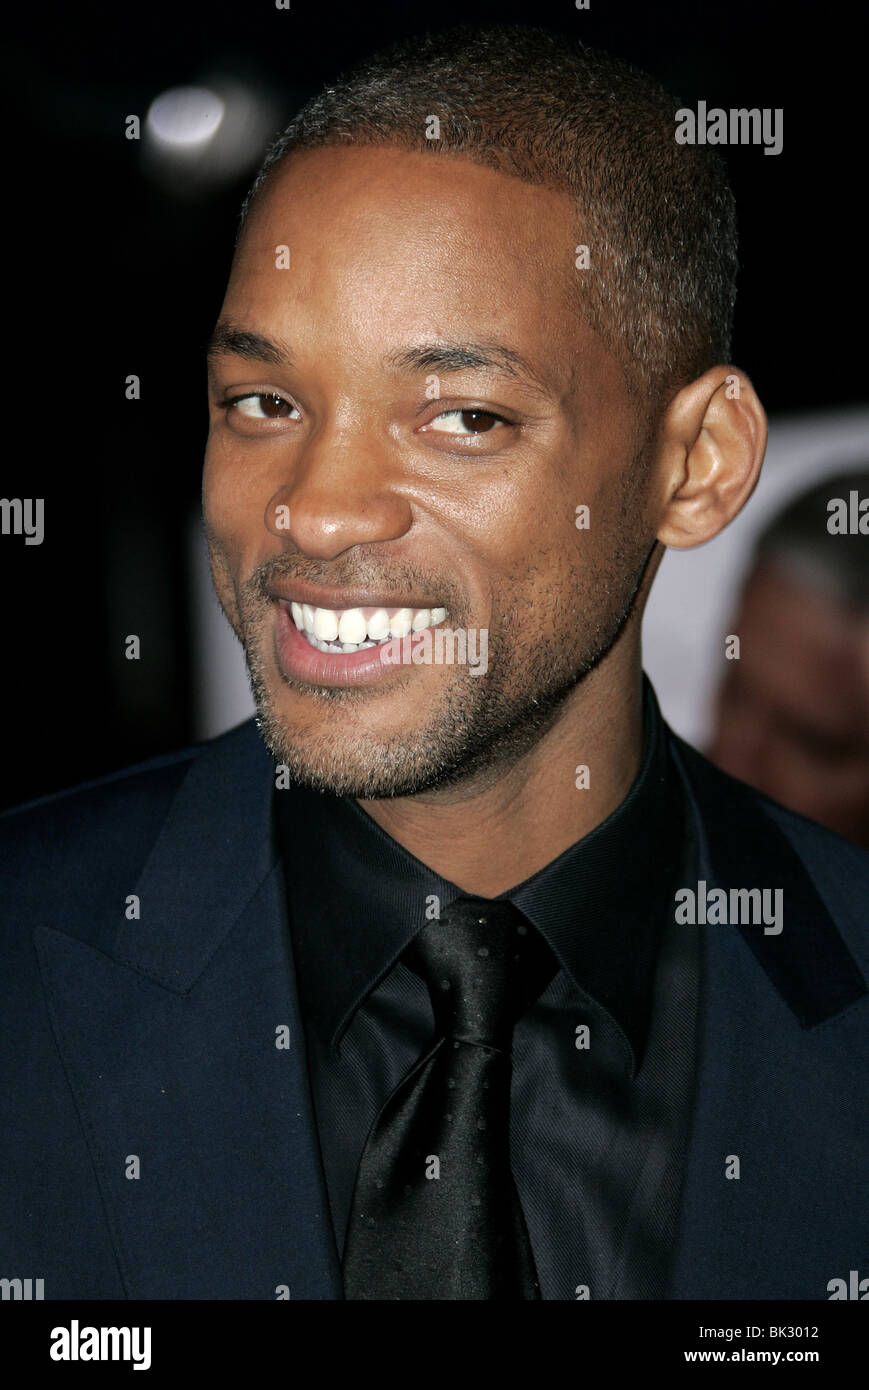 WILL SMITH THE PURSUIT OF HAPPYNESS WORLD PREMIERE WESTWOOD LOS ANGELES USA 07 December 2006 Stock Photo